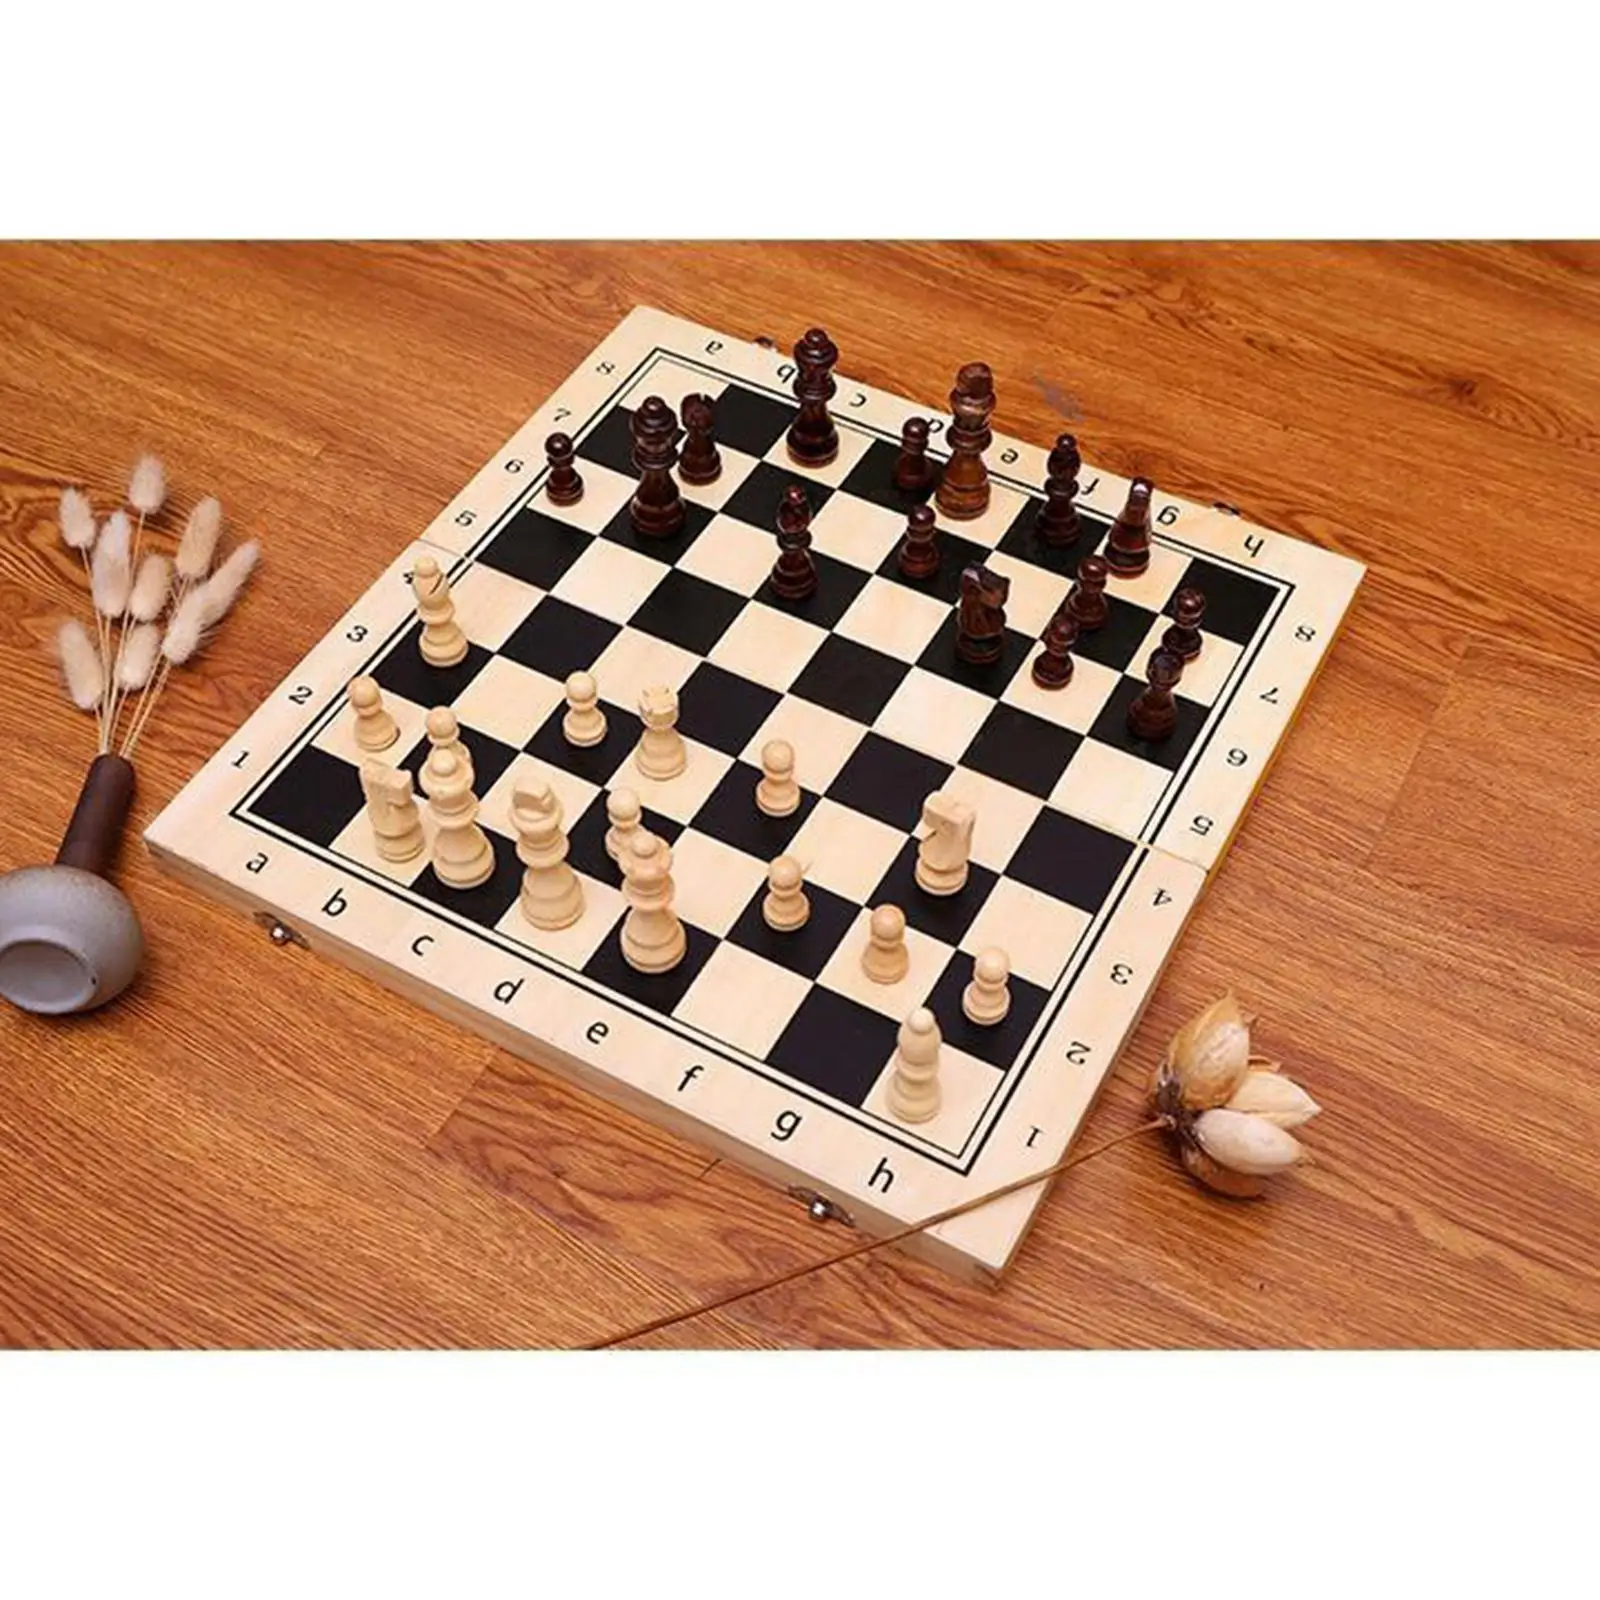 Handmade Folding Wooden  Chess Board Set with Extra 2 Queens, 39x39cm,